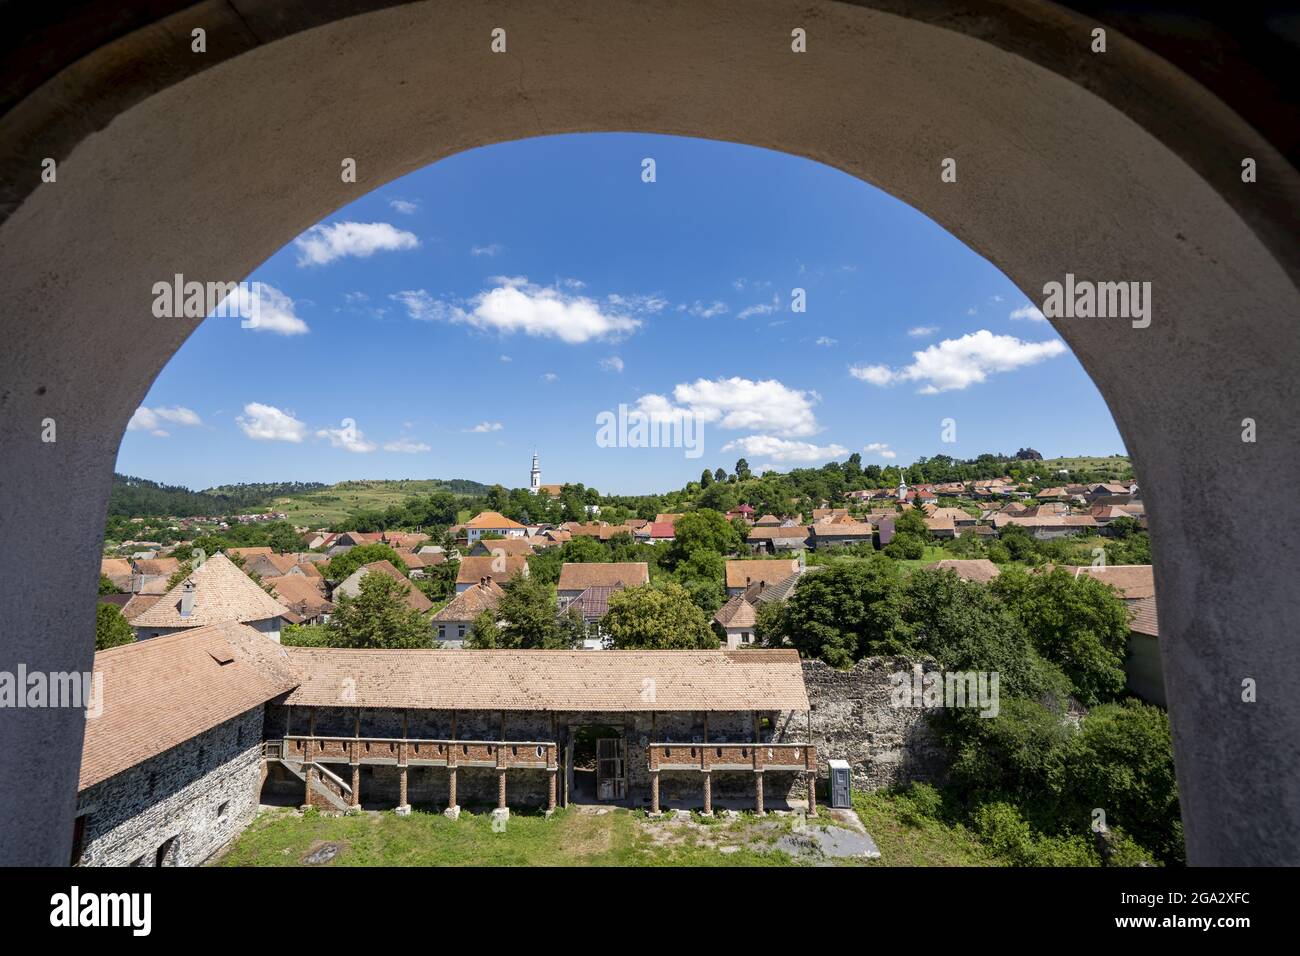 View of the town and the Cetatea Bethlen Medieval Castle of Racos through an archway; Racos, Transylvania, Romania Stock Photo